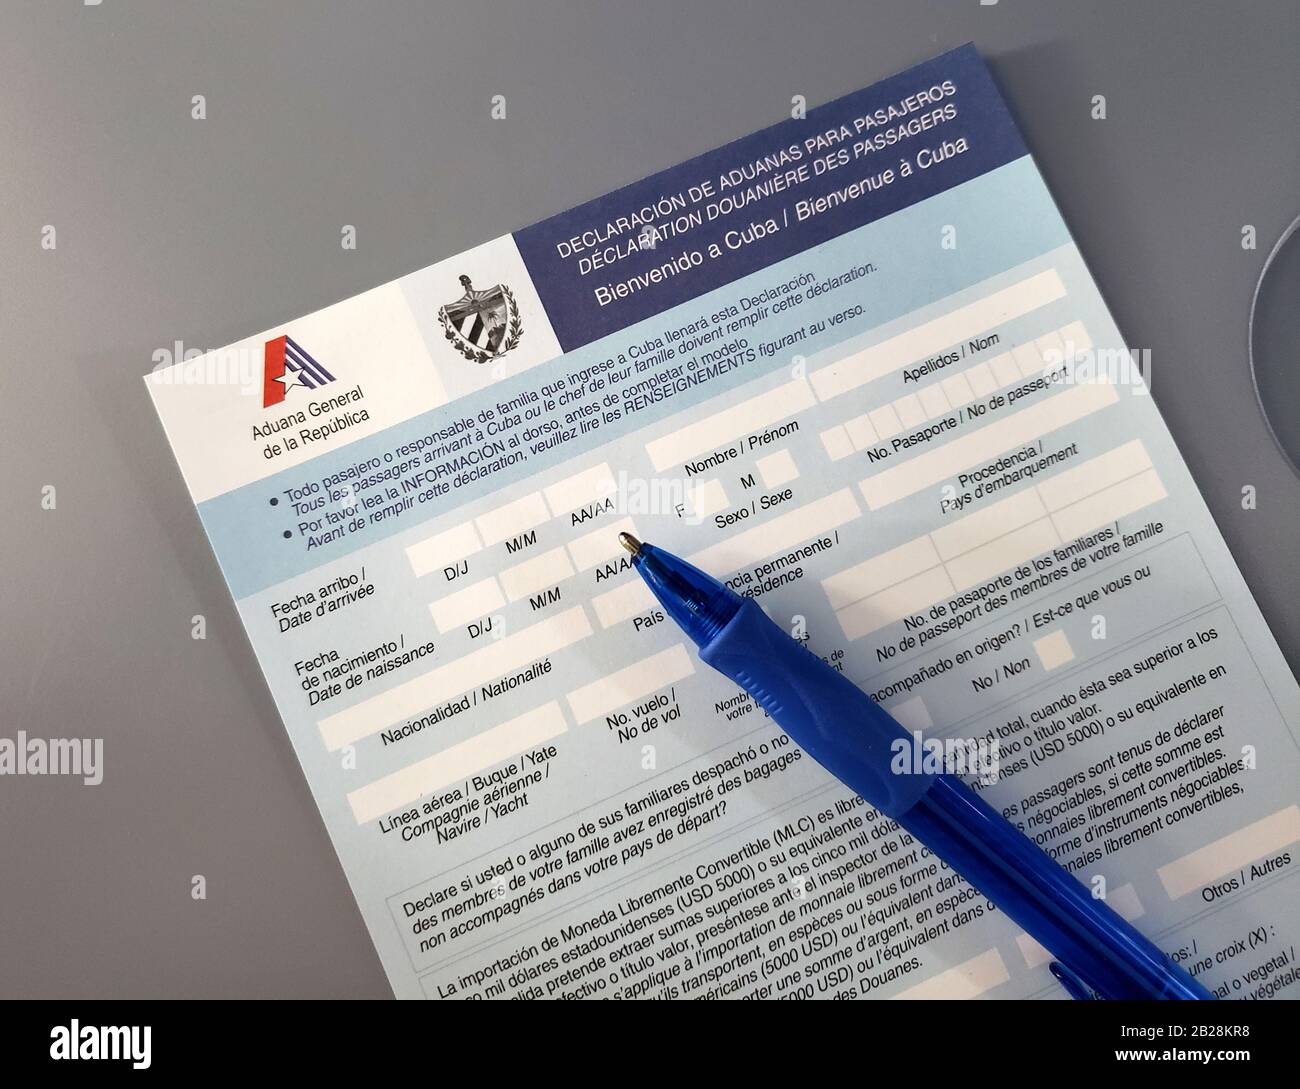 Cuba Visa declaration form. This form should be completed by any visitor or  tourist entering Cuba Stock Photo - Alamy